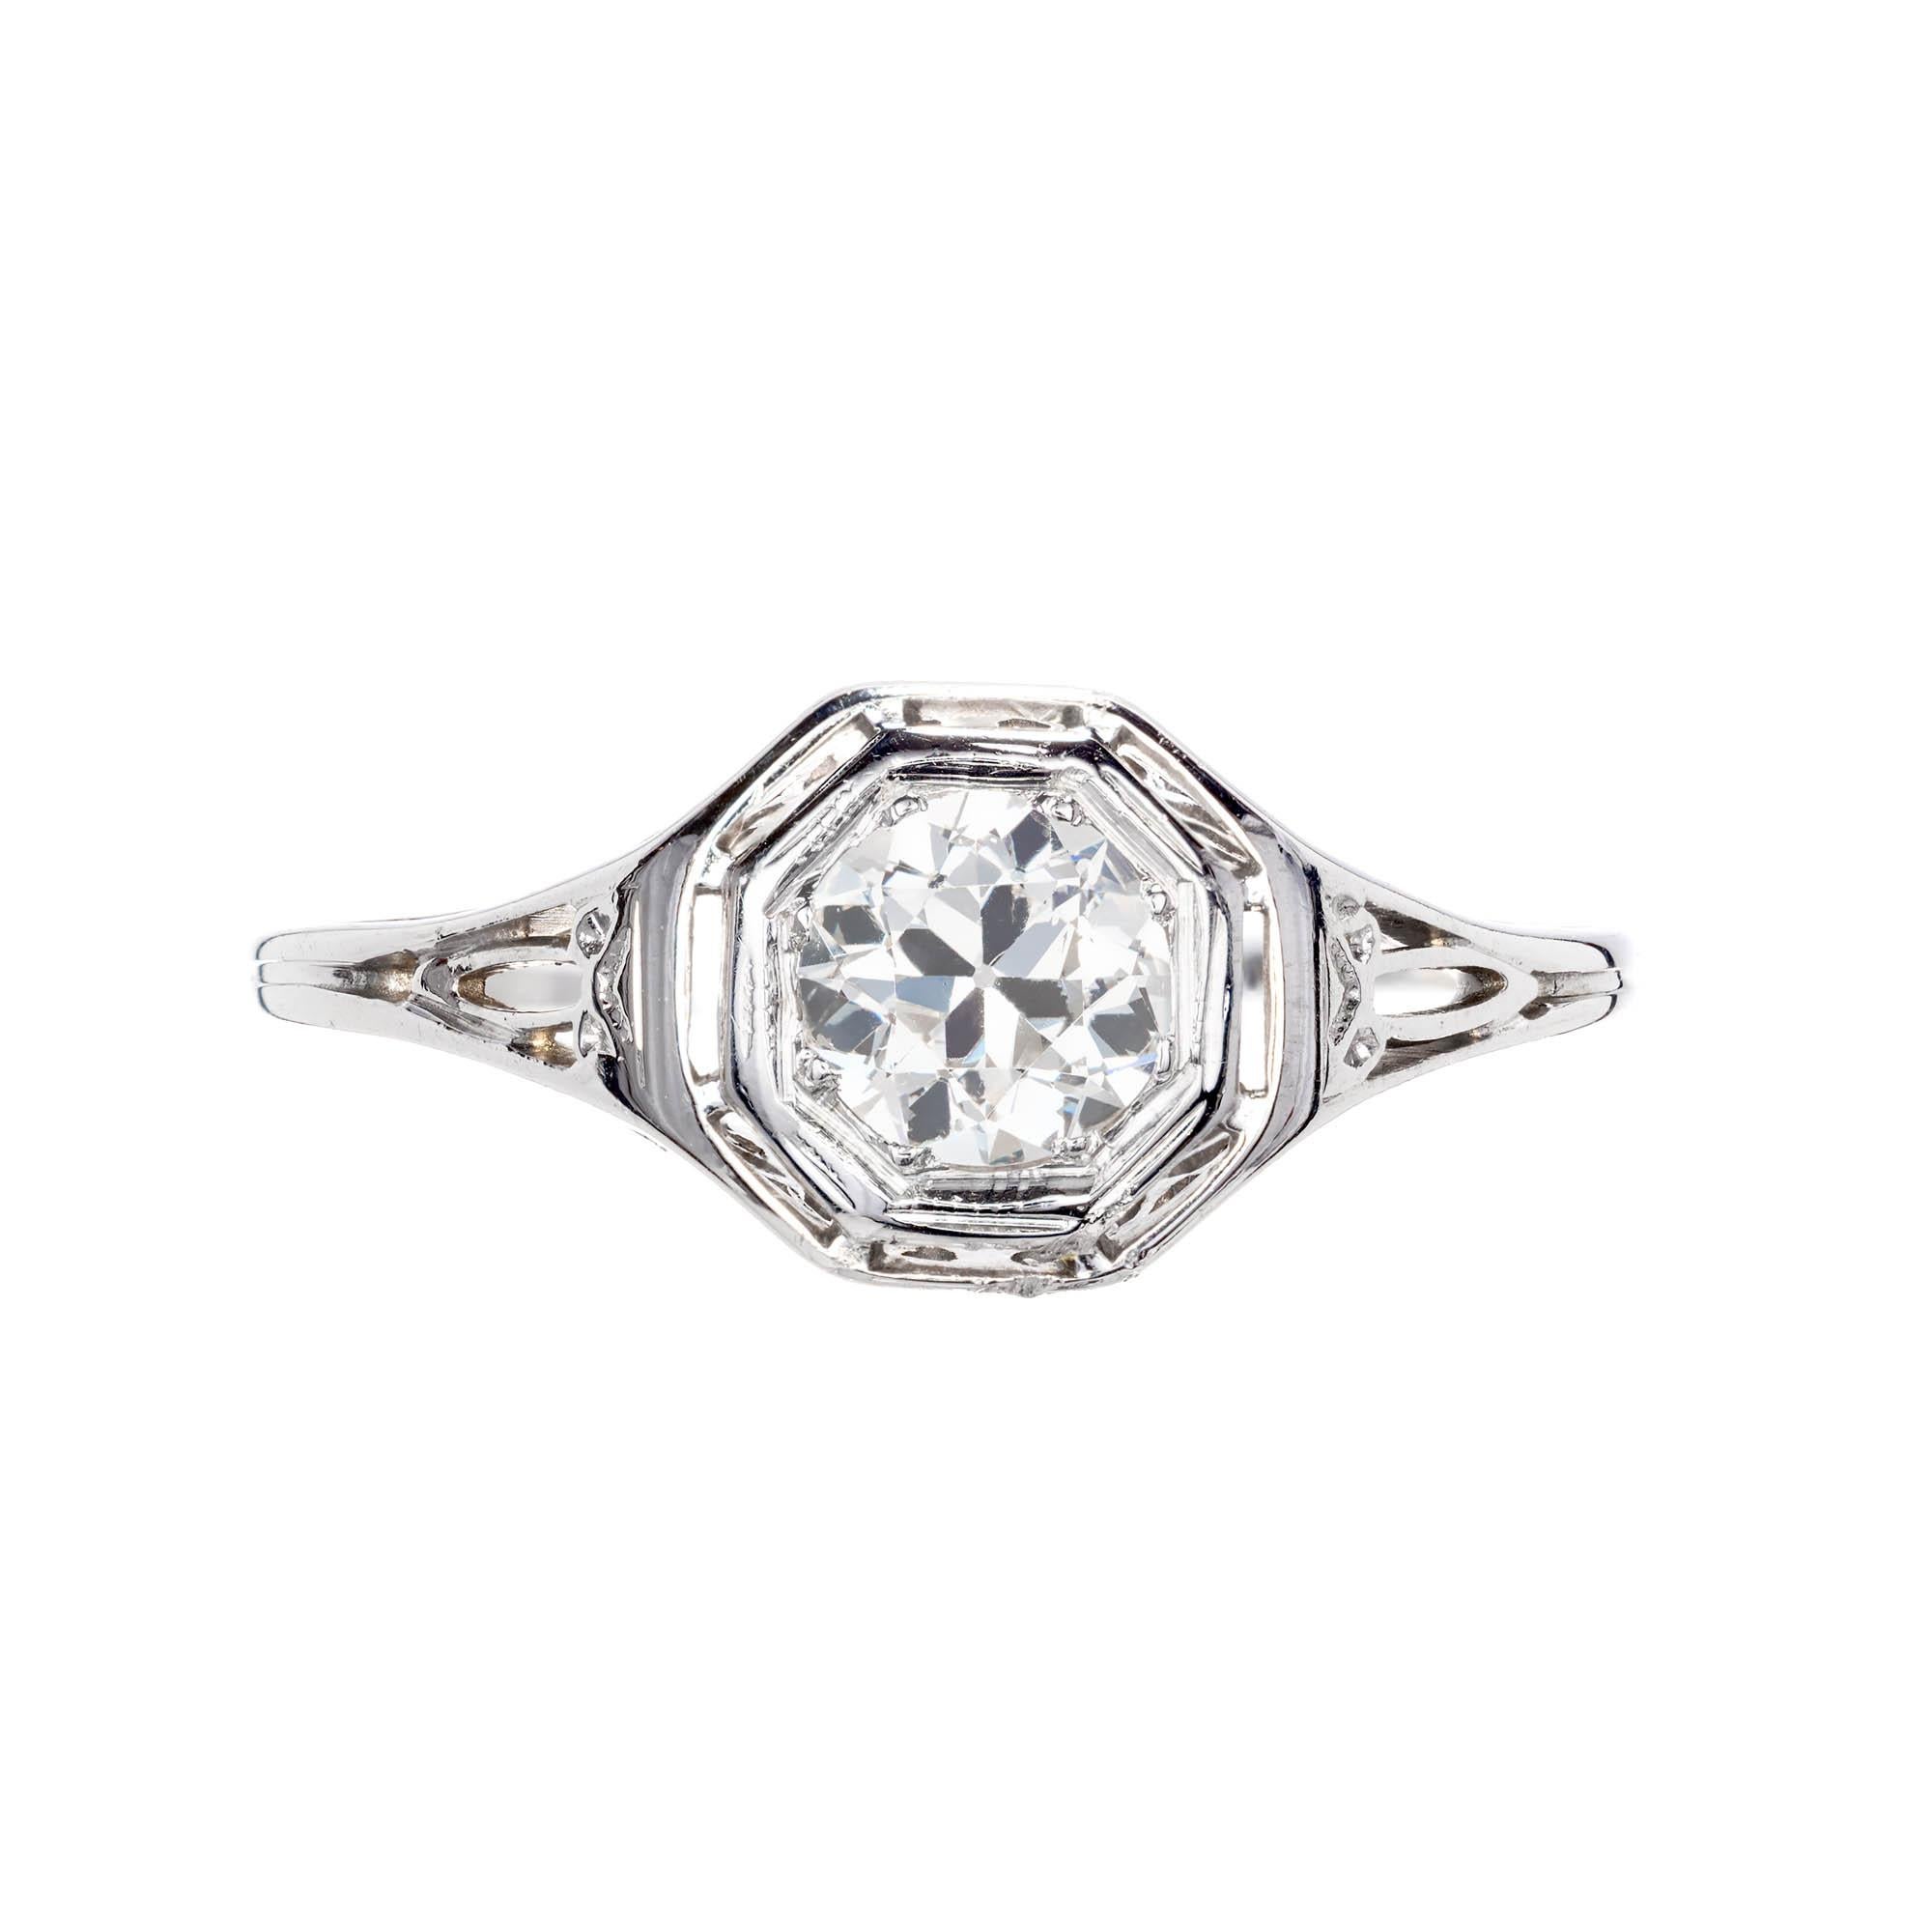 Antique .45ct diamond filigree style ring set with Old European diamond, in a 18k white gold setting.

1 round old euro diamond 5.0 x 4.86 x 2.78mm G-H SI approximate .45 carats  EGL Certificate # US 314545301D
Size: 4.5 and sizable
18k White